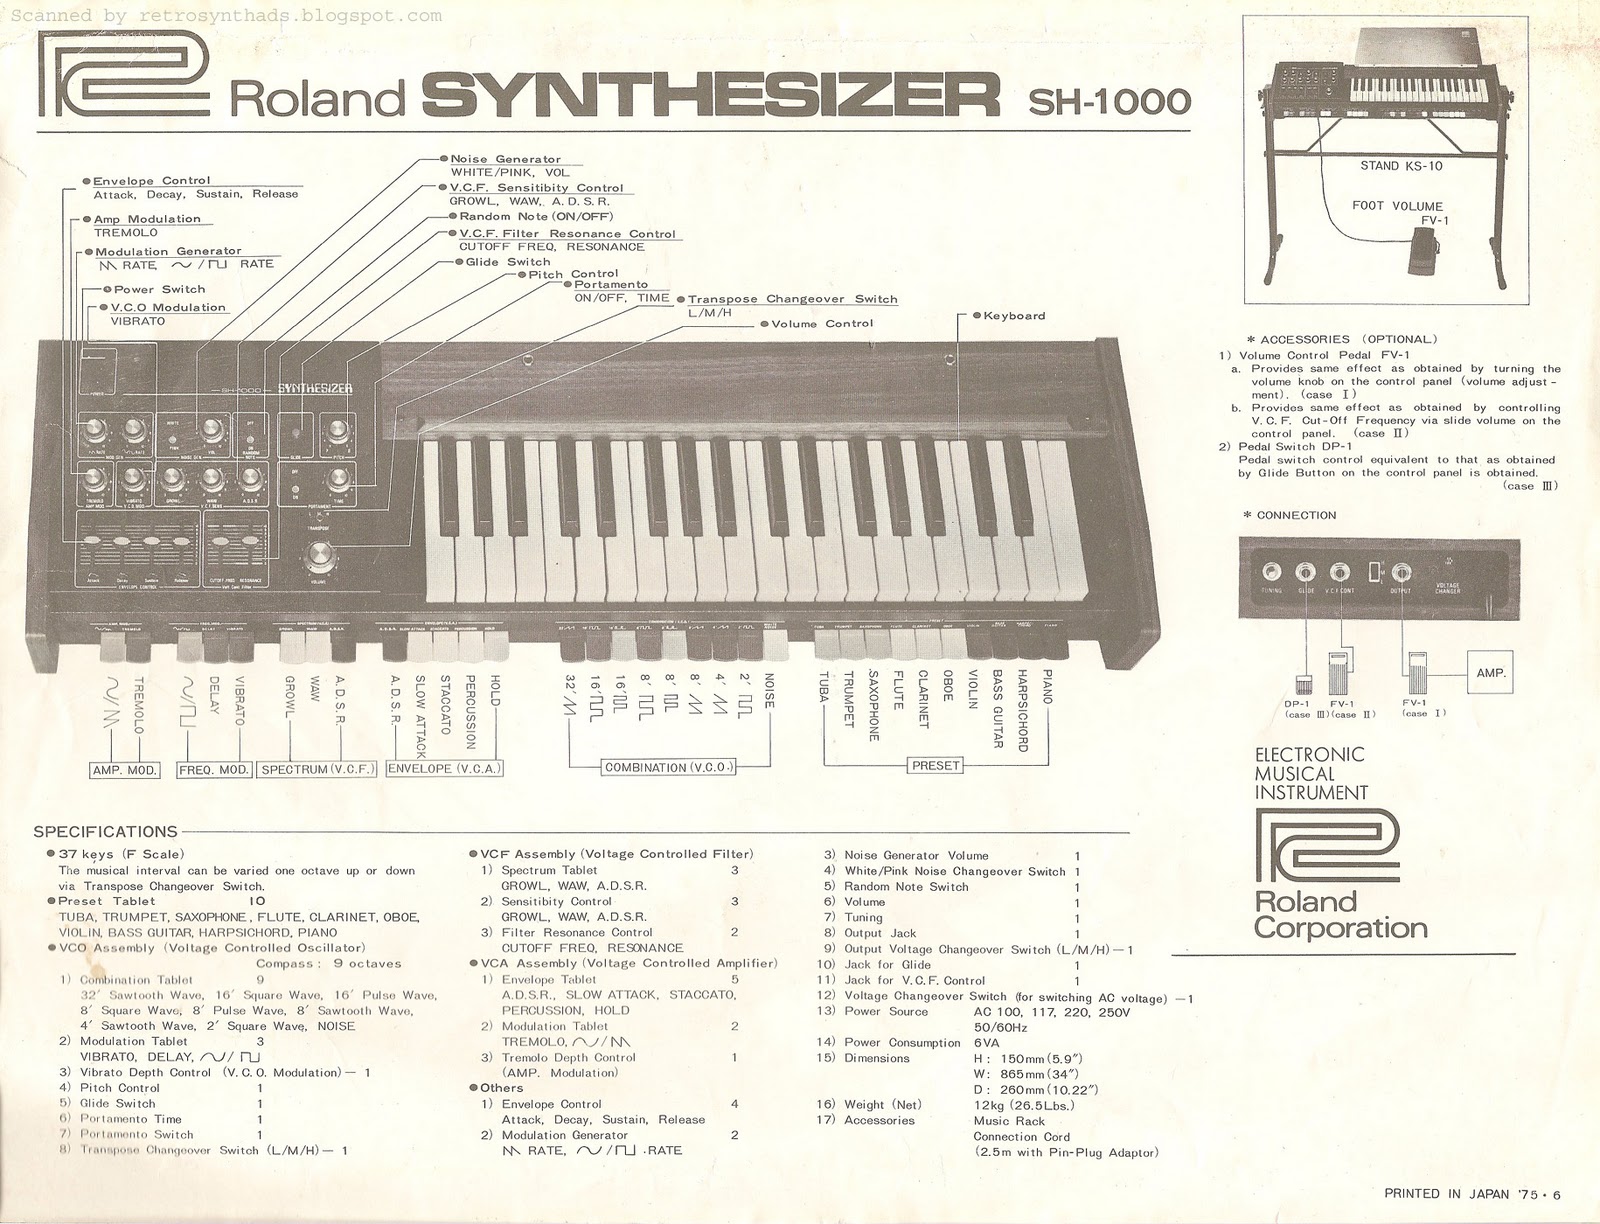 Retro Synth Ads: Roland SH-1000 "For those far-out sounds" brochure, 1975